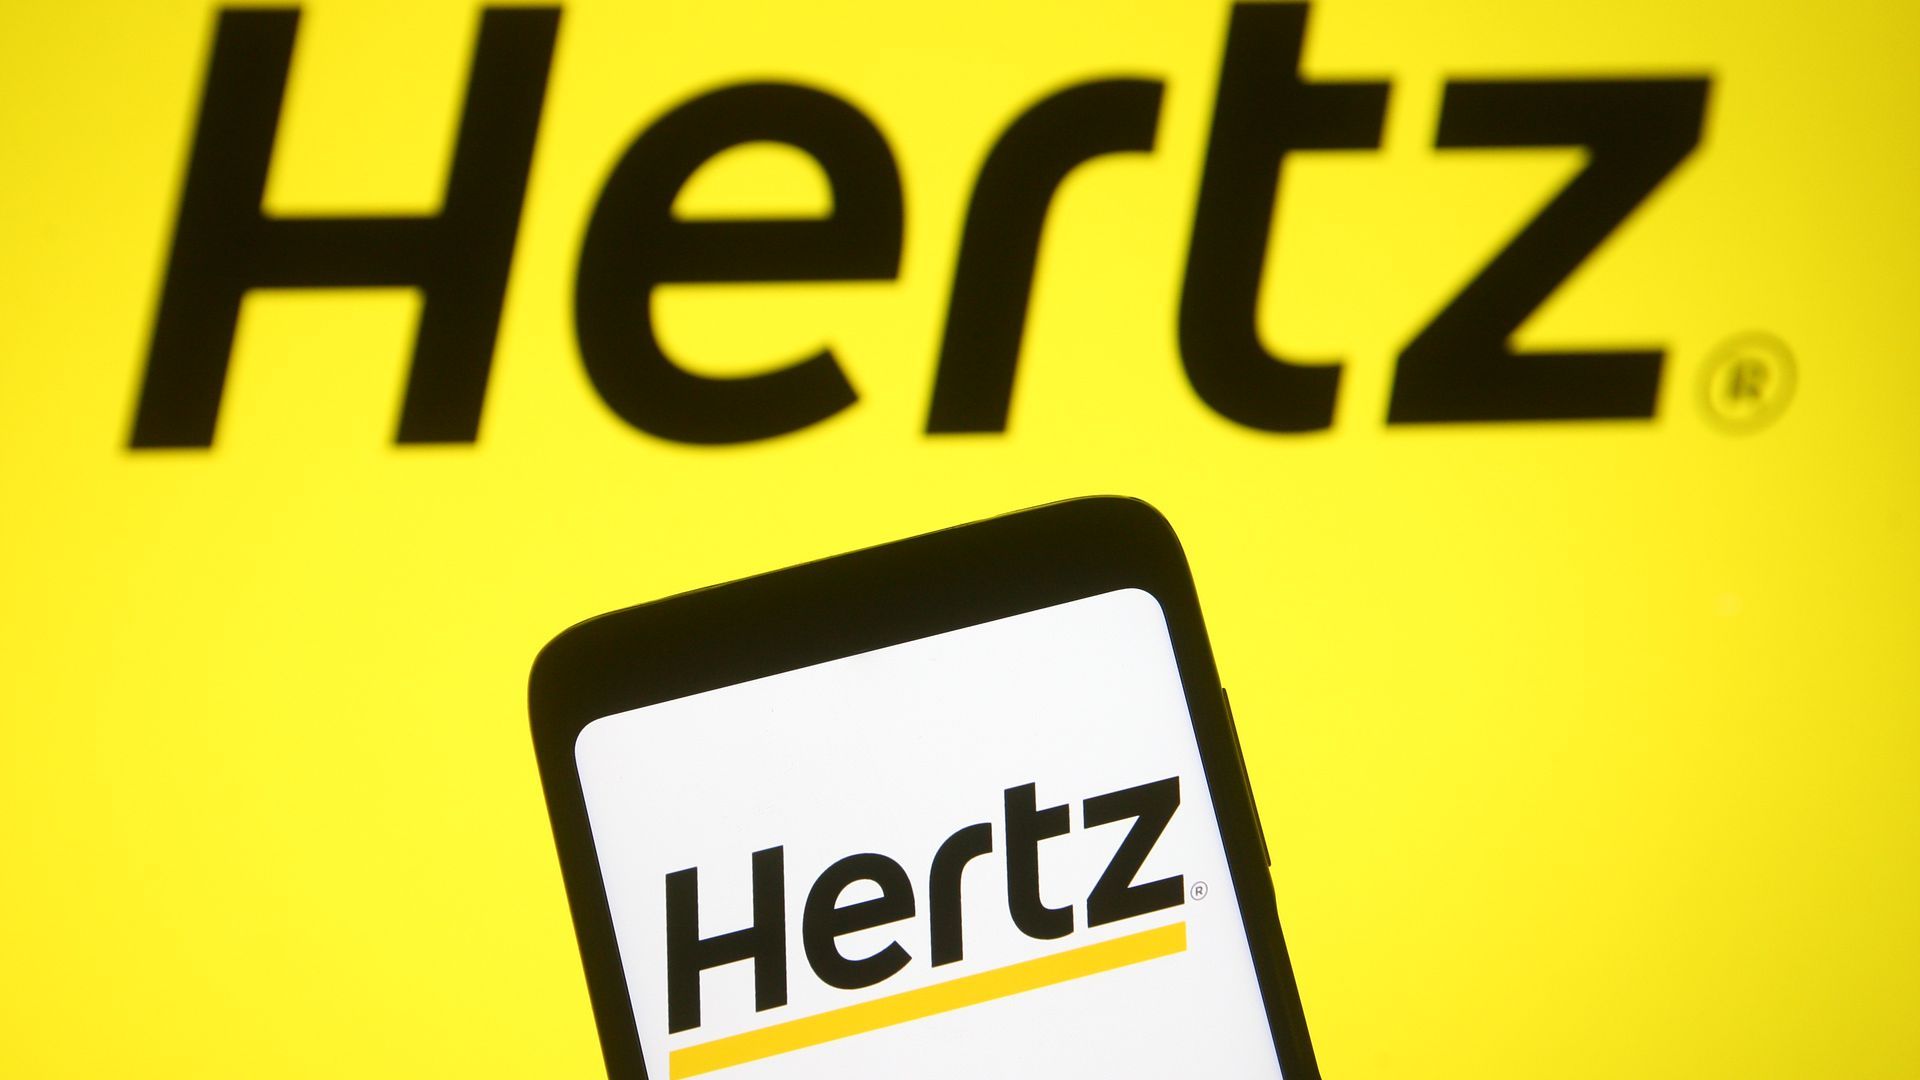 Picture of a phone screen with the Hertz logo on it. The phone is placed in front of a wall with the Hertz logo also on it.